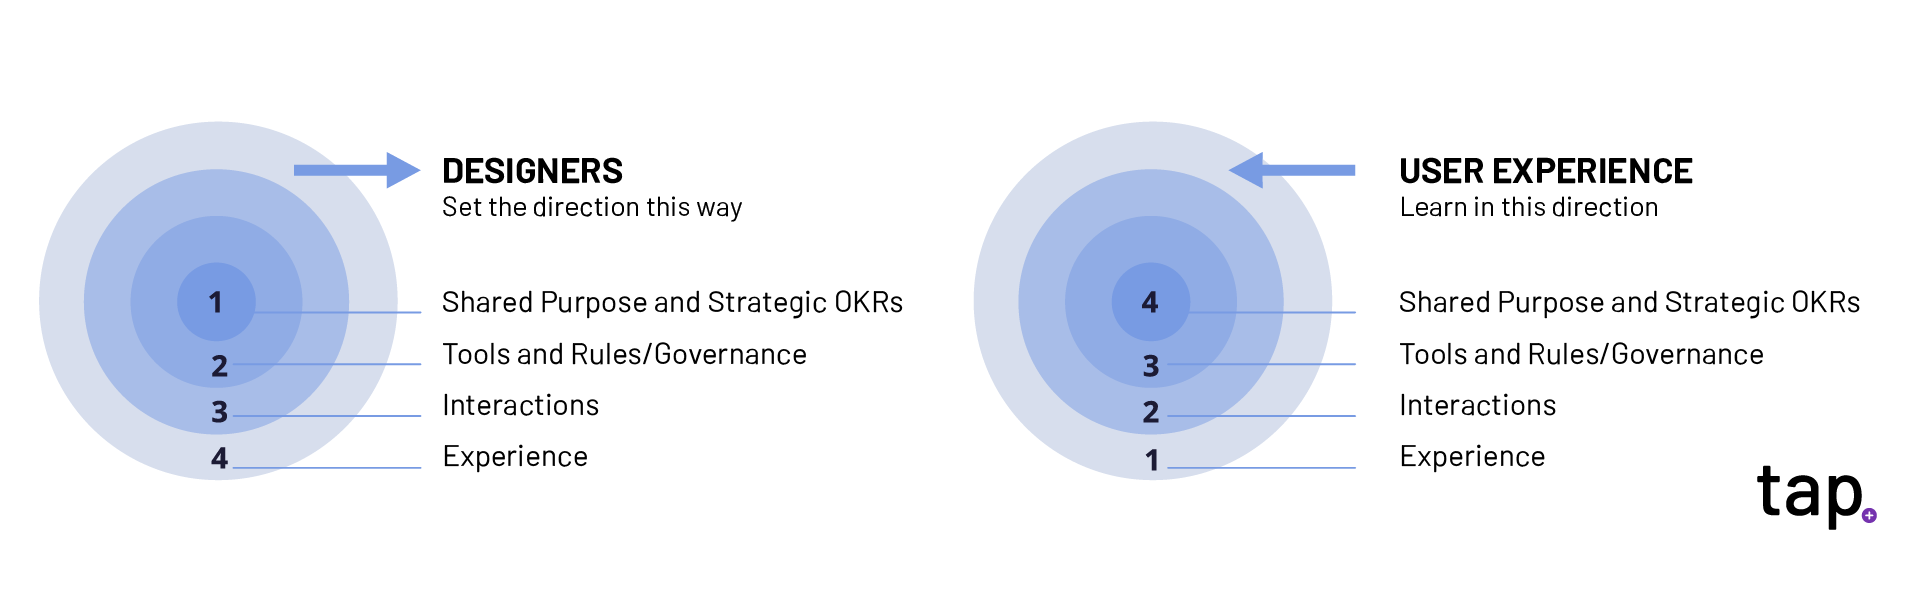 What are Strategic and Tactical OKRs, and Why Do They Matter?